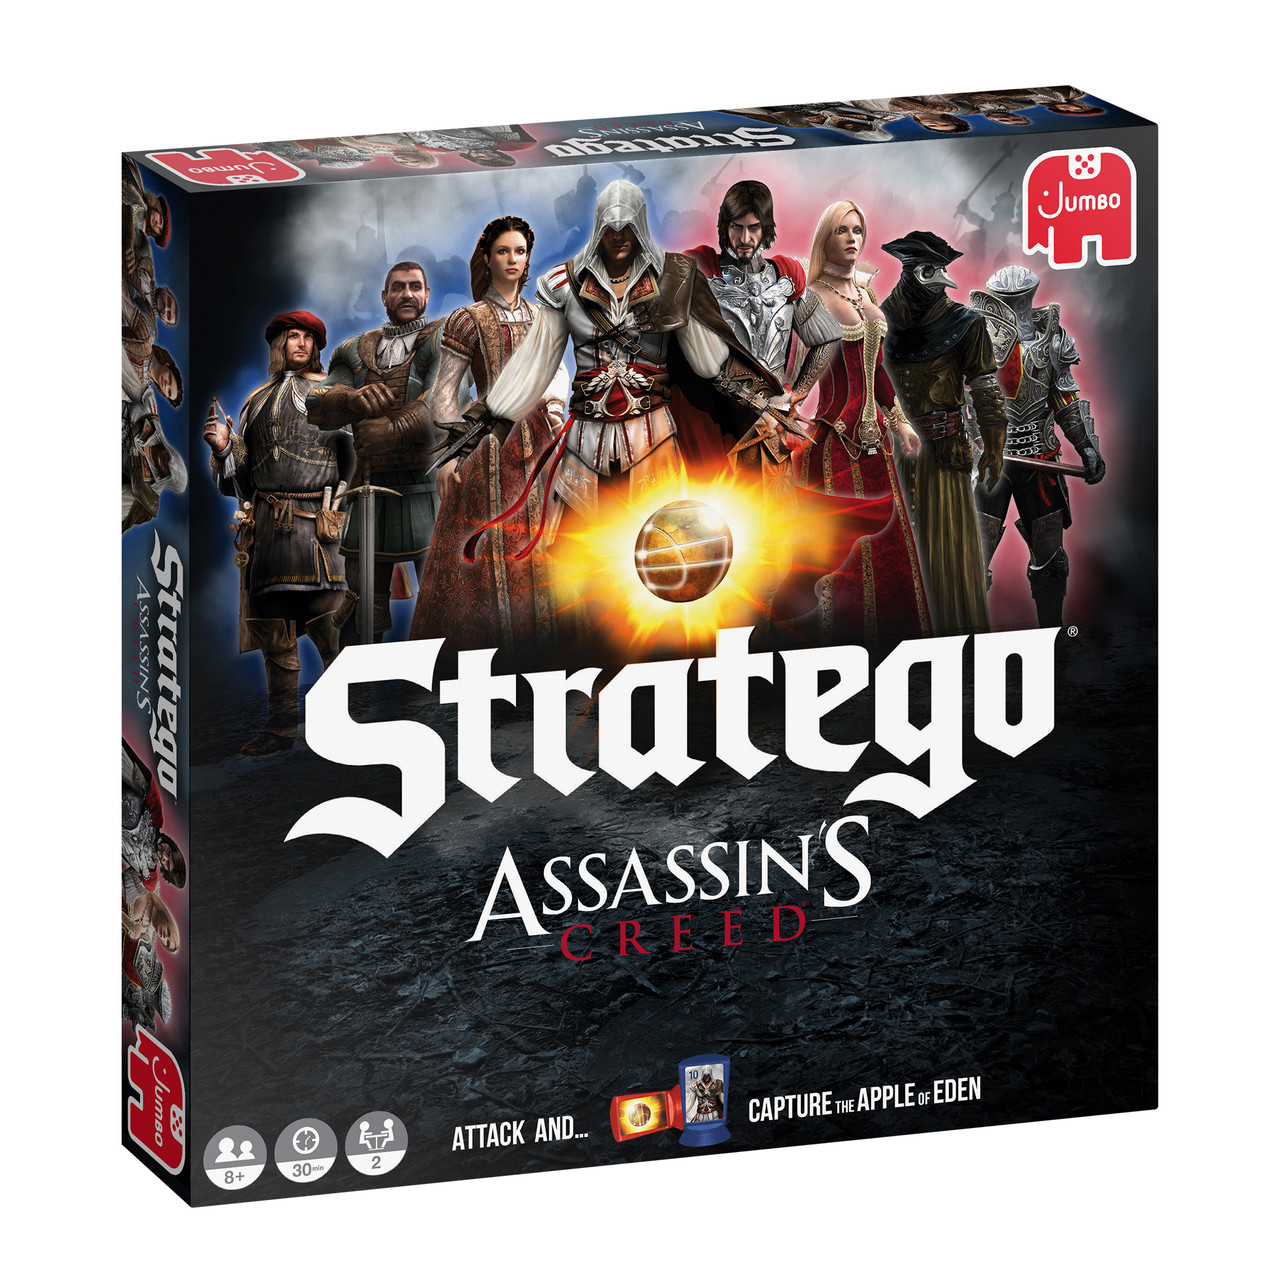 Stratego Assassin's Creed (Sold Out - Restock Notification Only